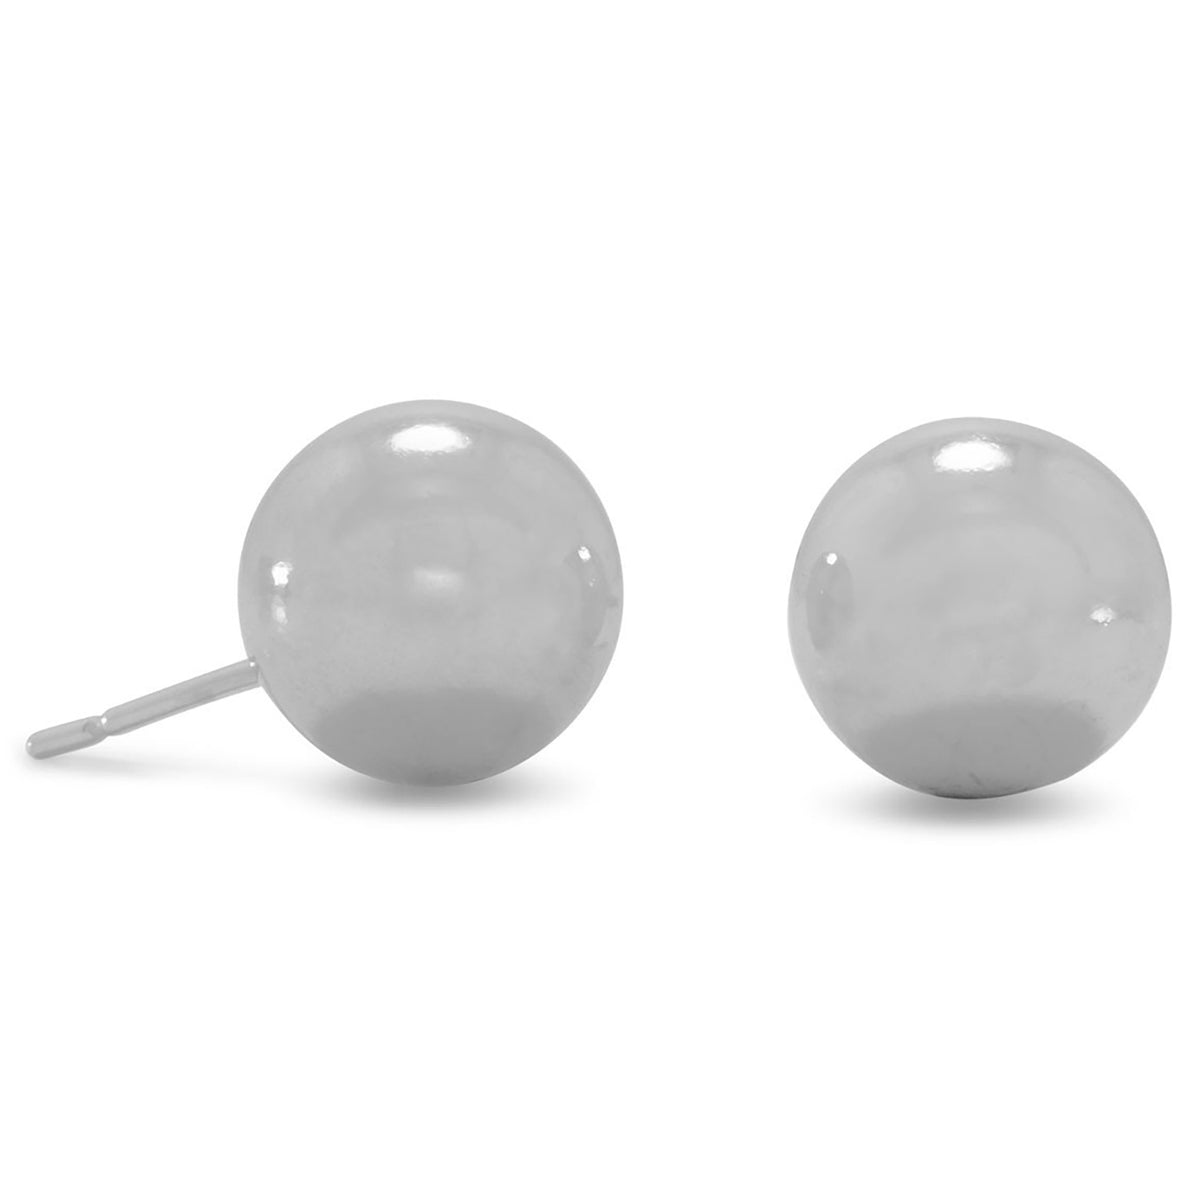 Shop online with 10mm Ball Stud Earrings silverconnection